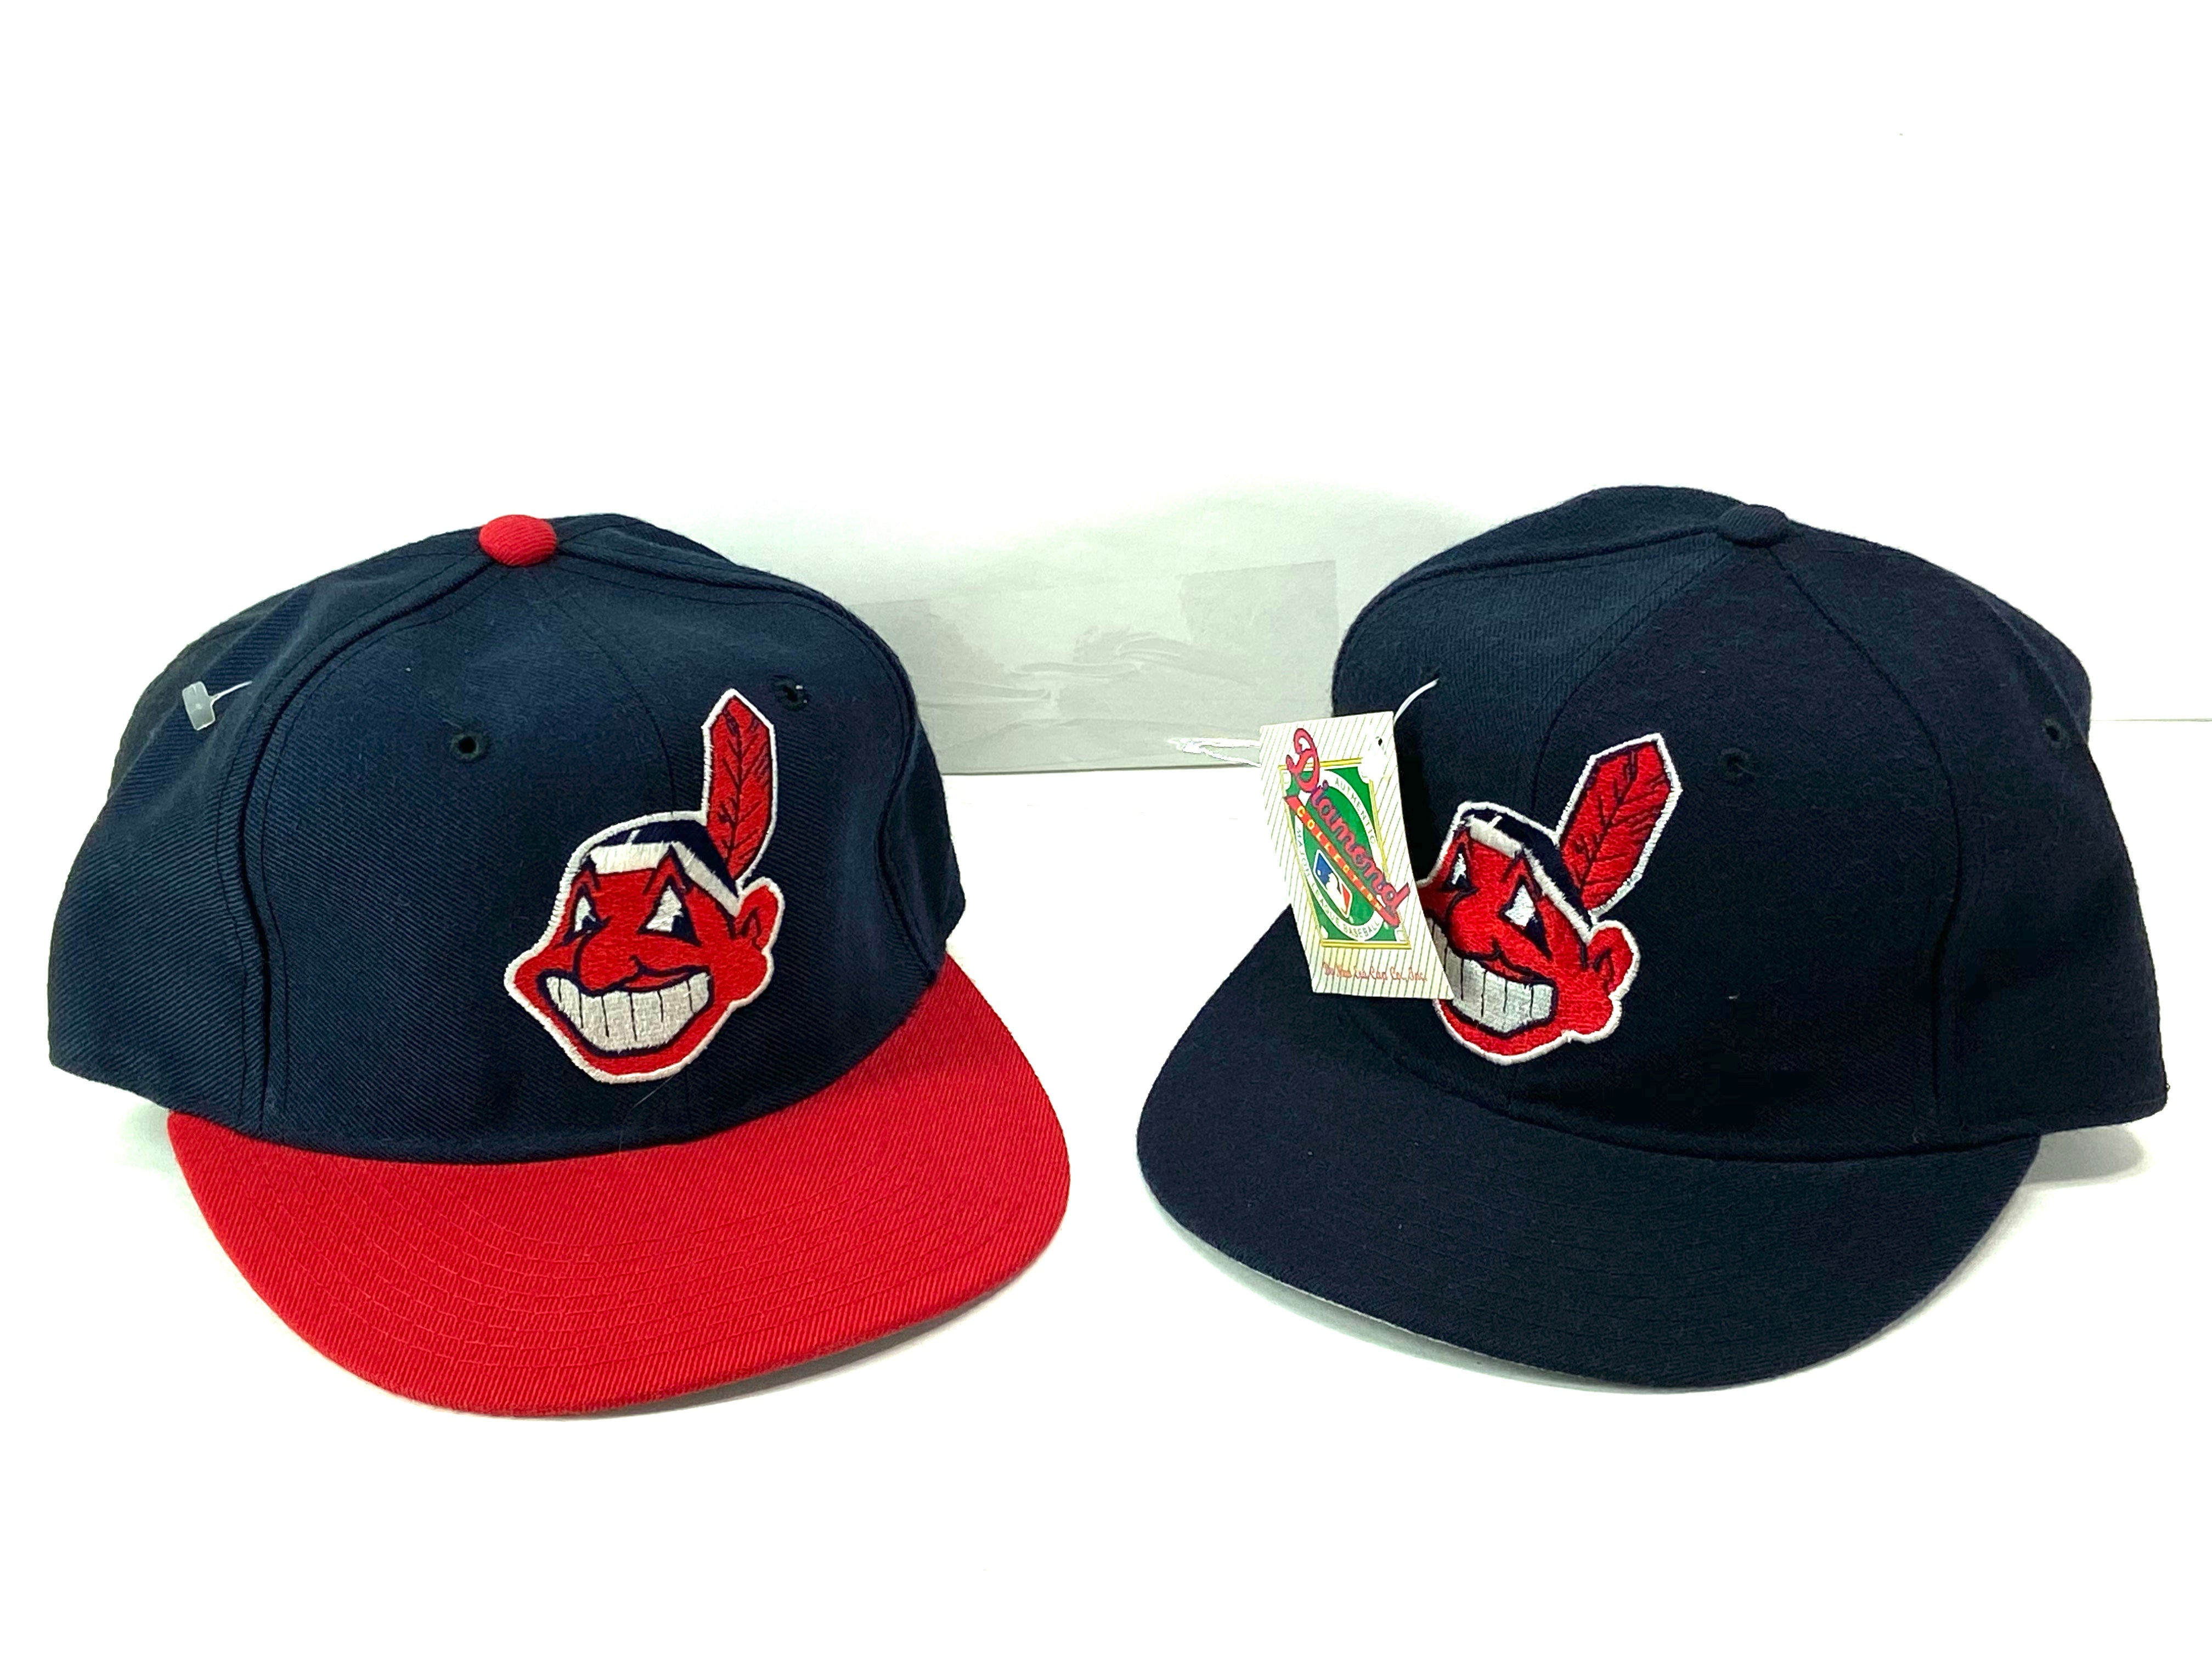 New Era - Team Shimmer Cleveland Indians 59FIFTY Fitted Cap - Cream